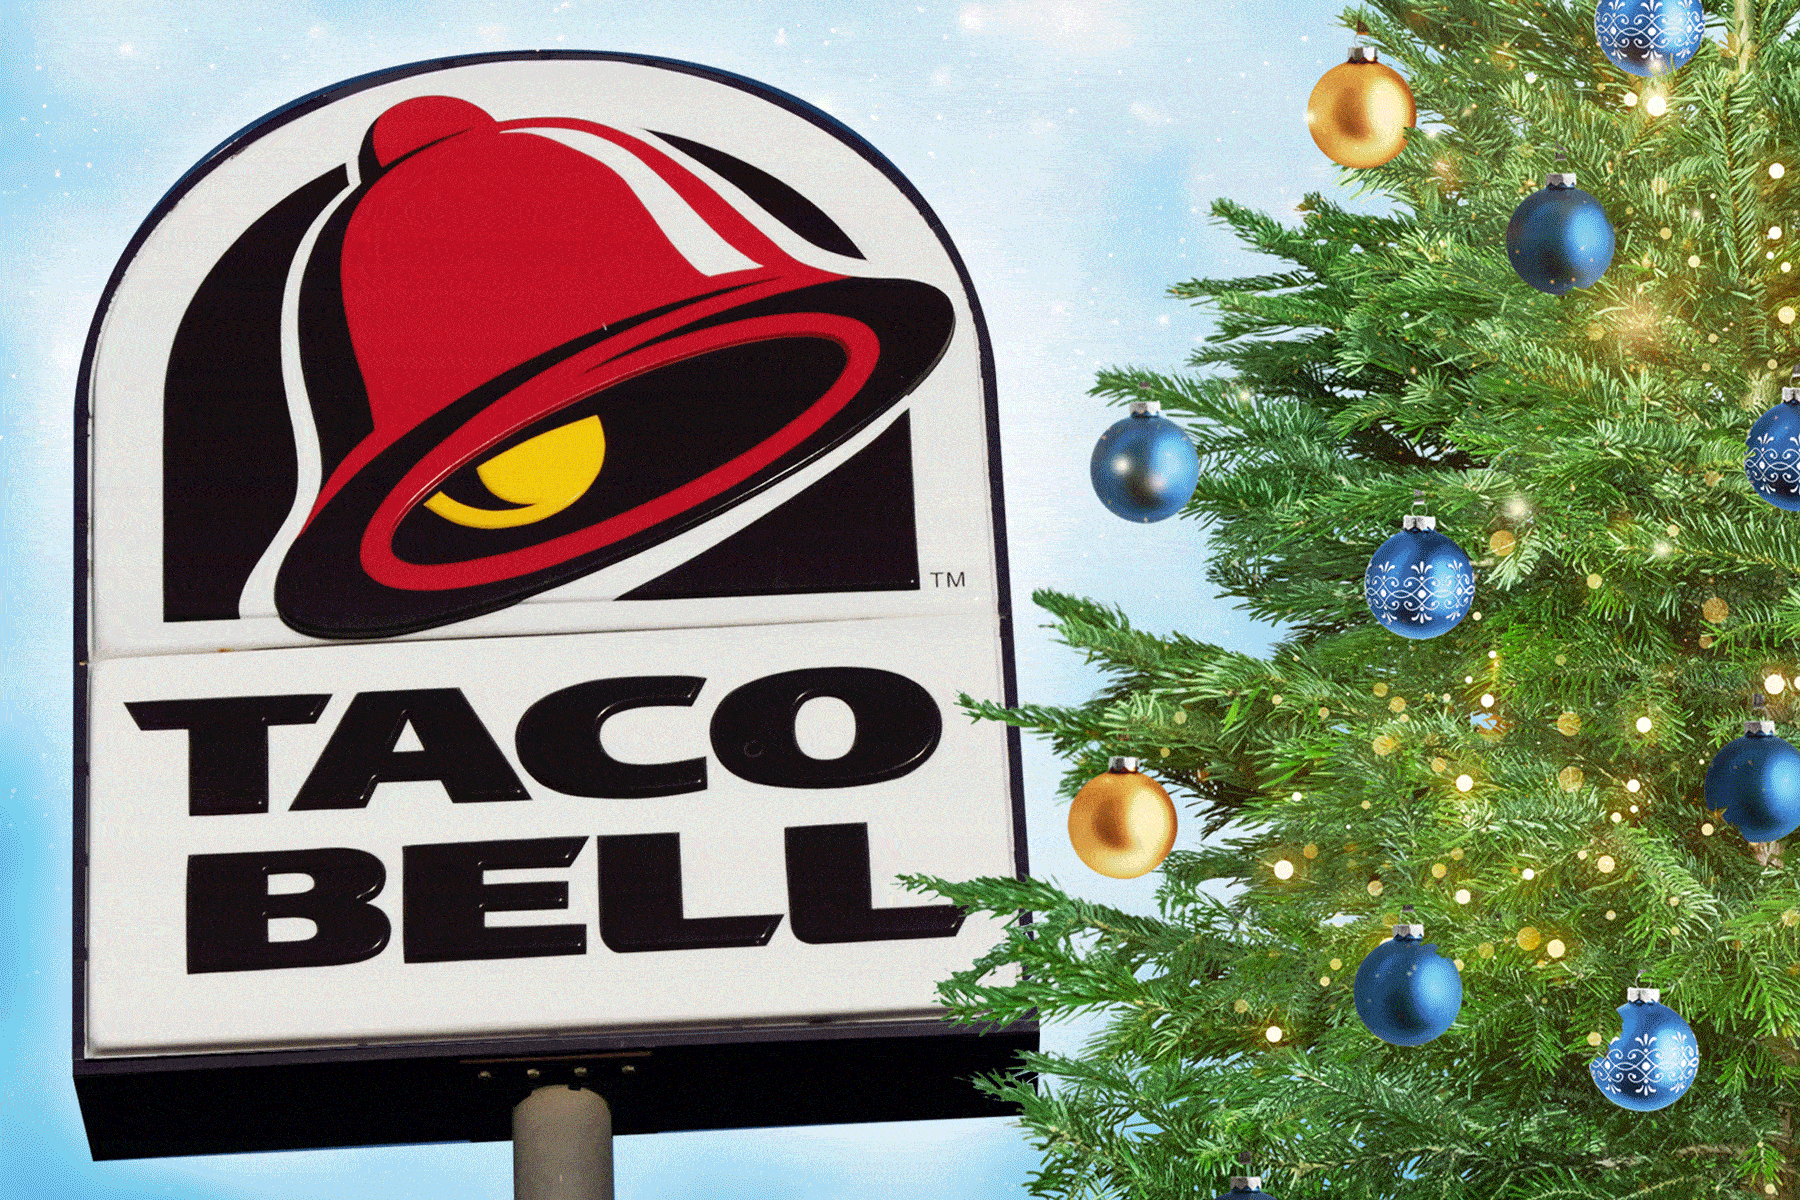 Taco Bell Christmas party included three-way sex games: lawsuit